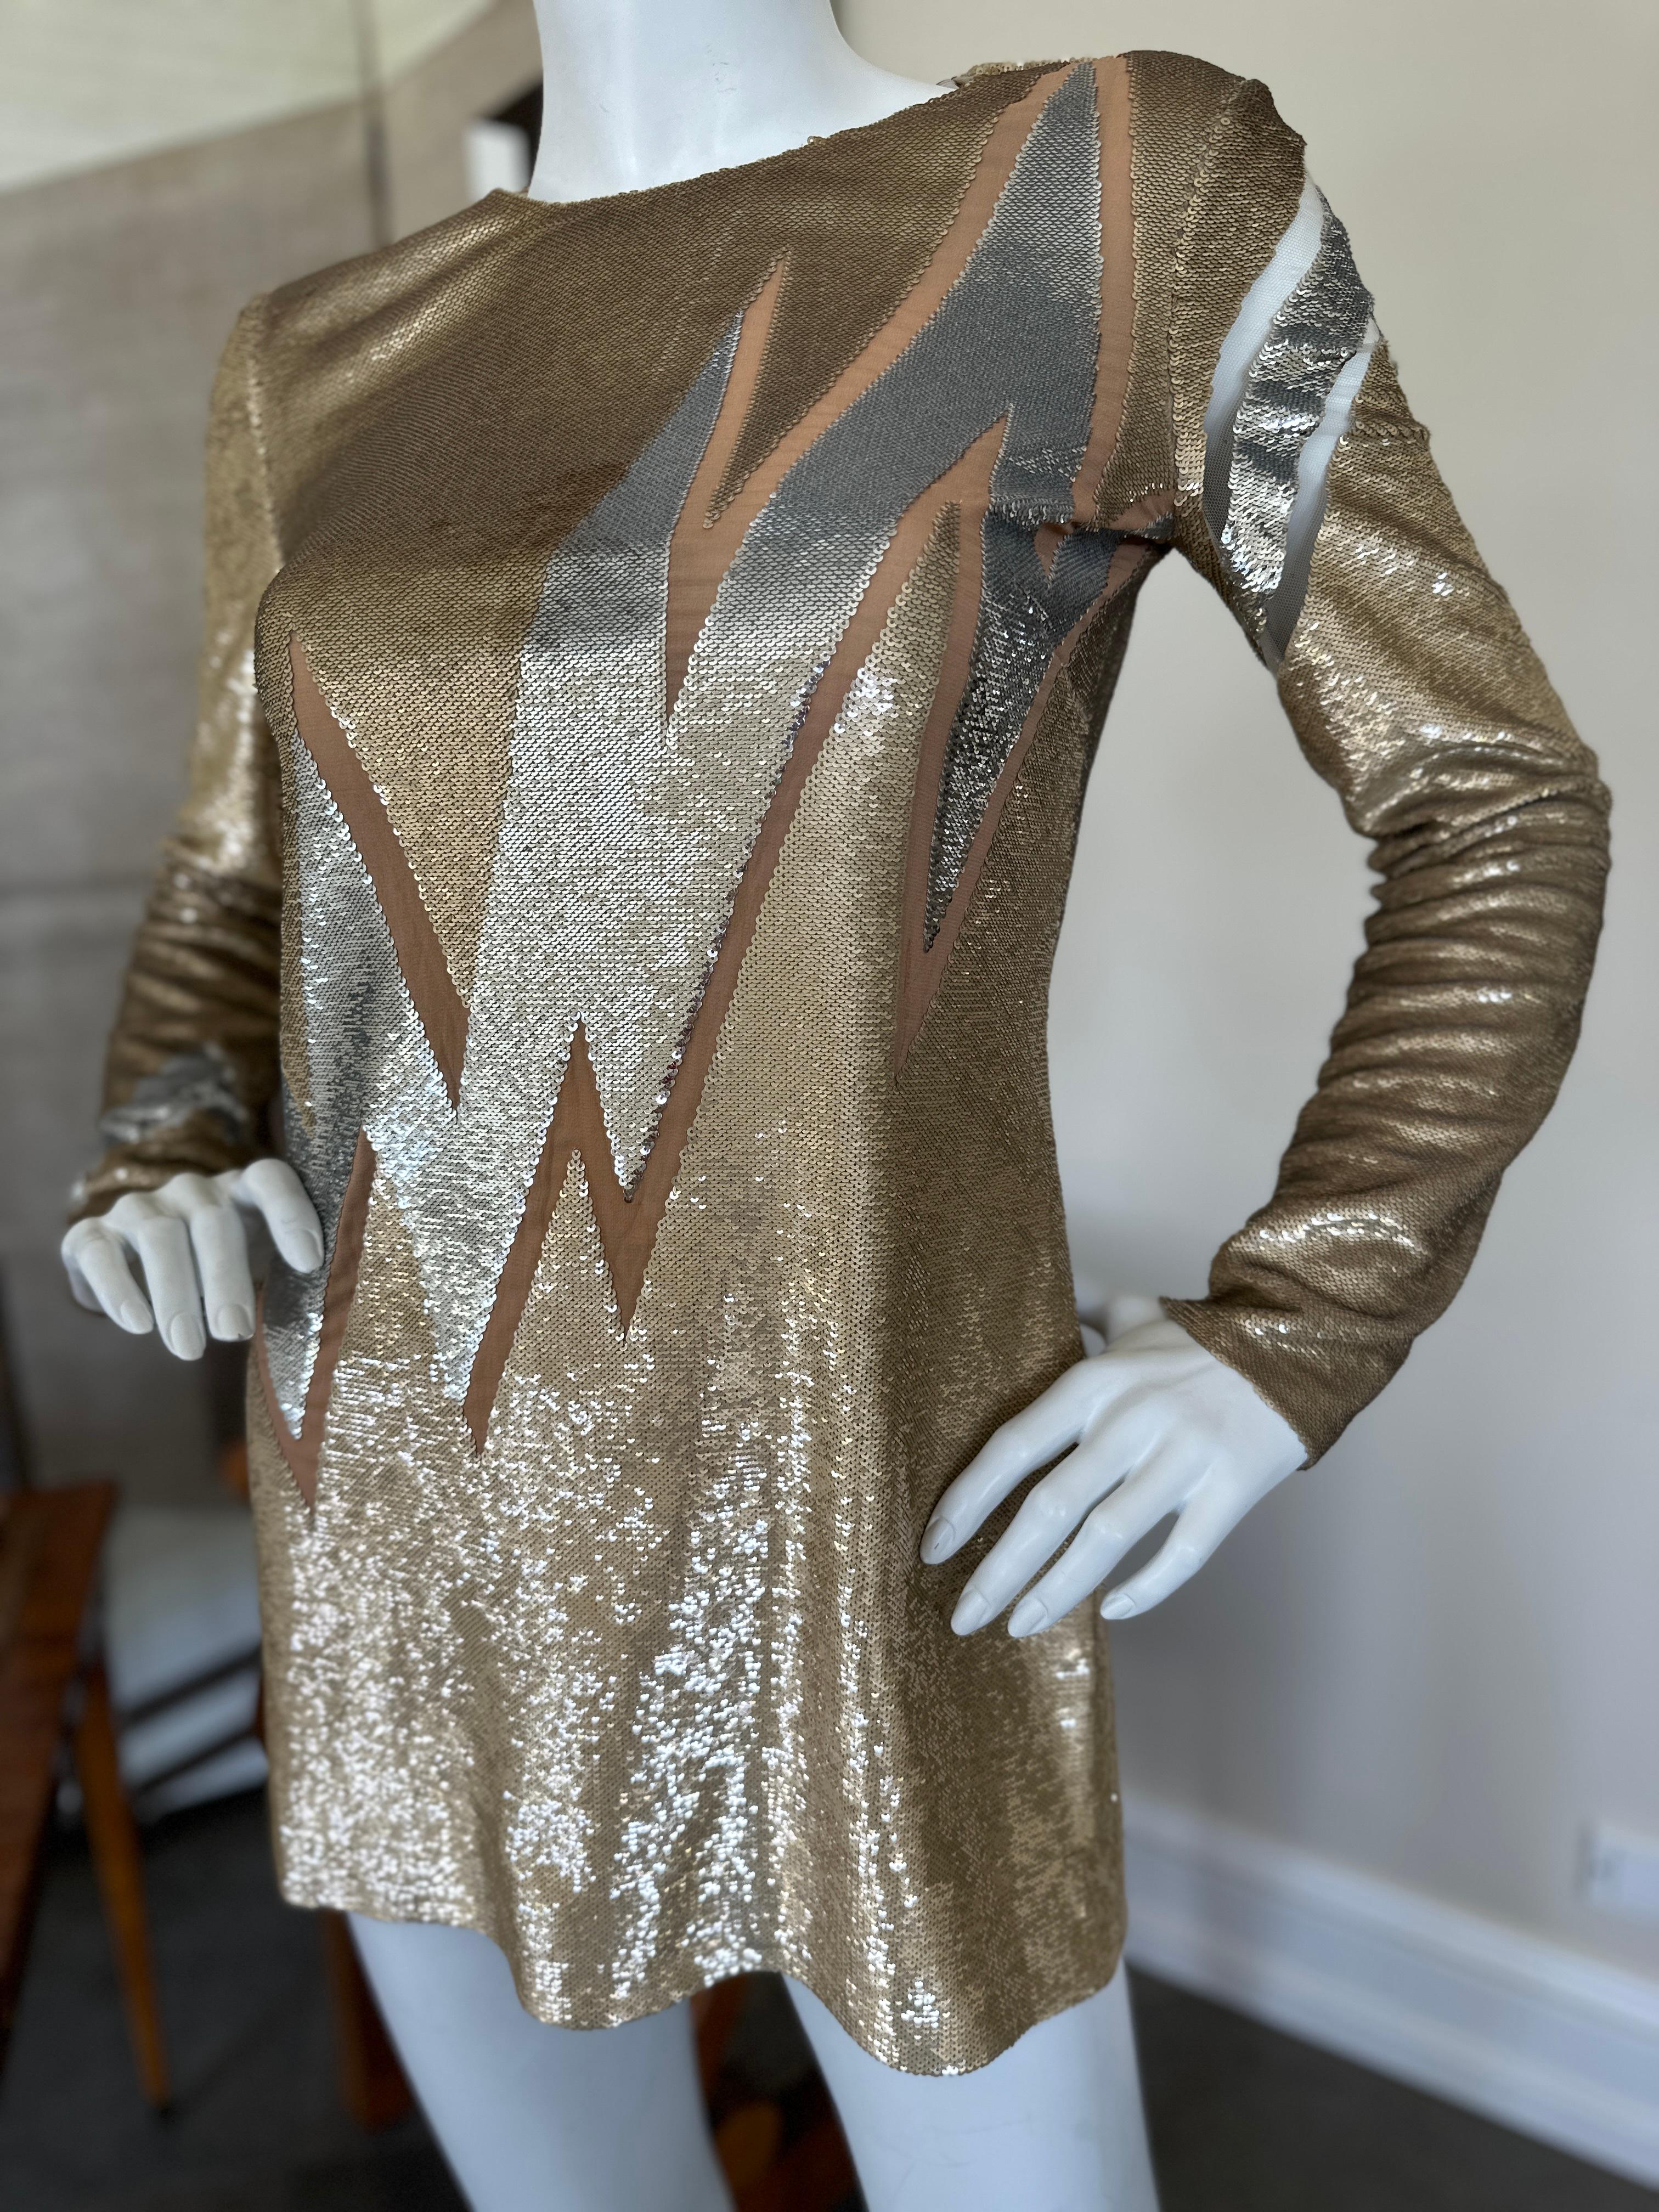 Emilio Pucci Current Season Gold Sequin Lightning Bolt Mini Dress.
This is so cute, and is currently in Neimans for $2500
Size 4
Bust 42